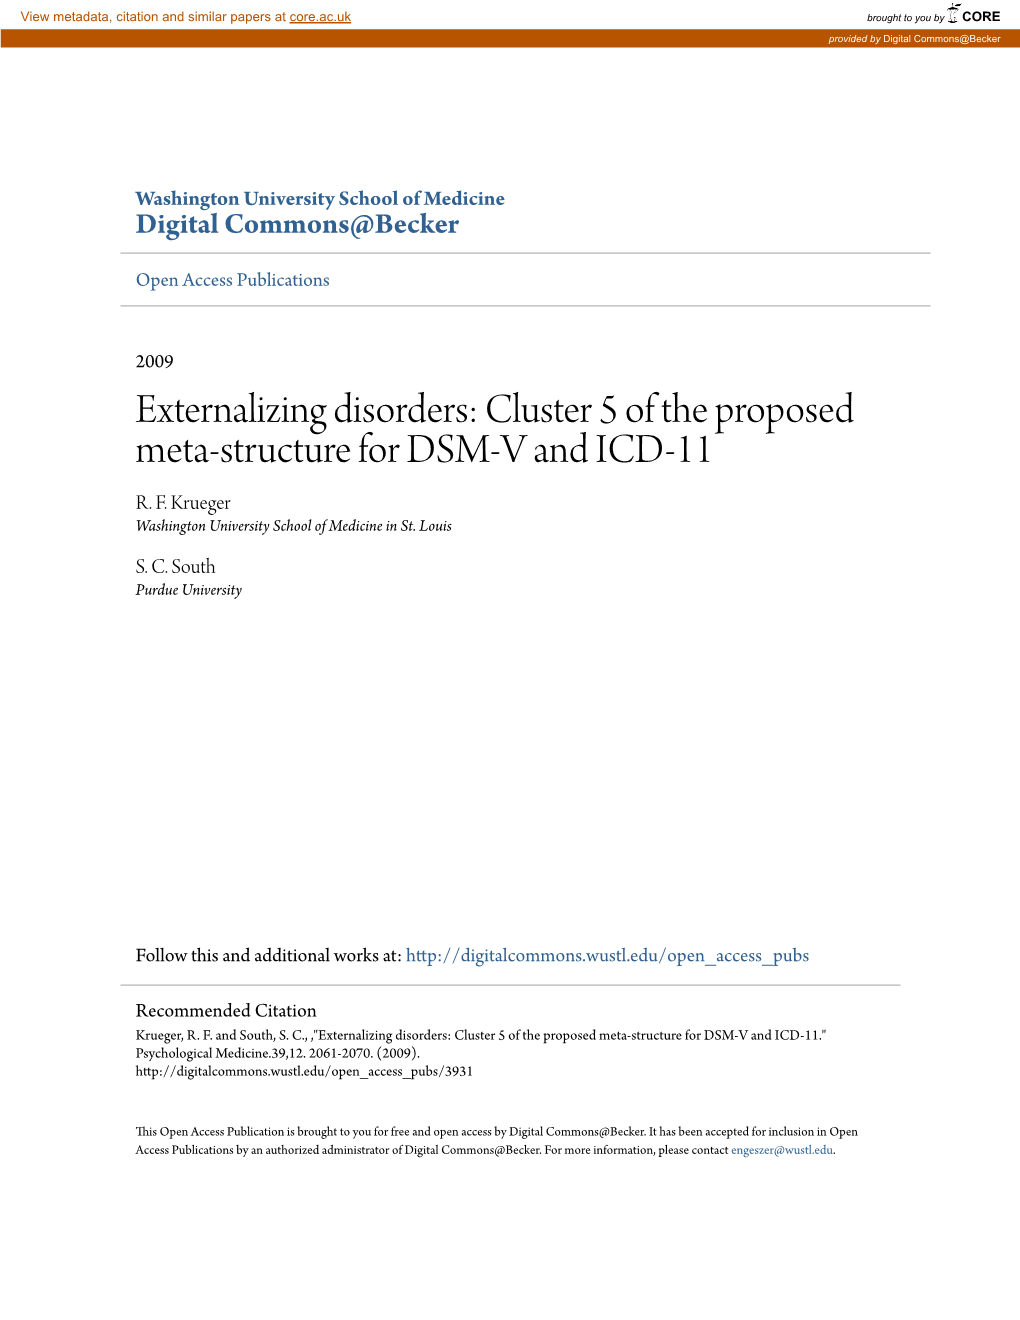 Externalizing Disorders: Cluster 5 of the Proposed Meta-Structure for DSM-V and ICD-11 R